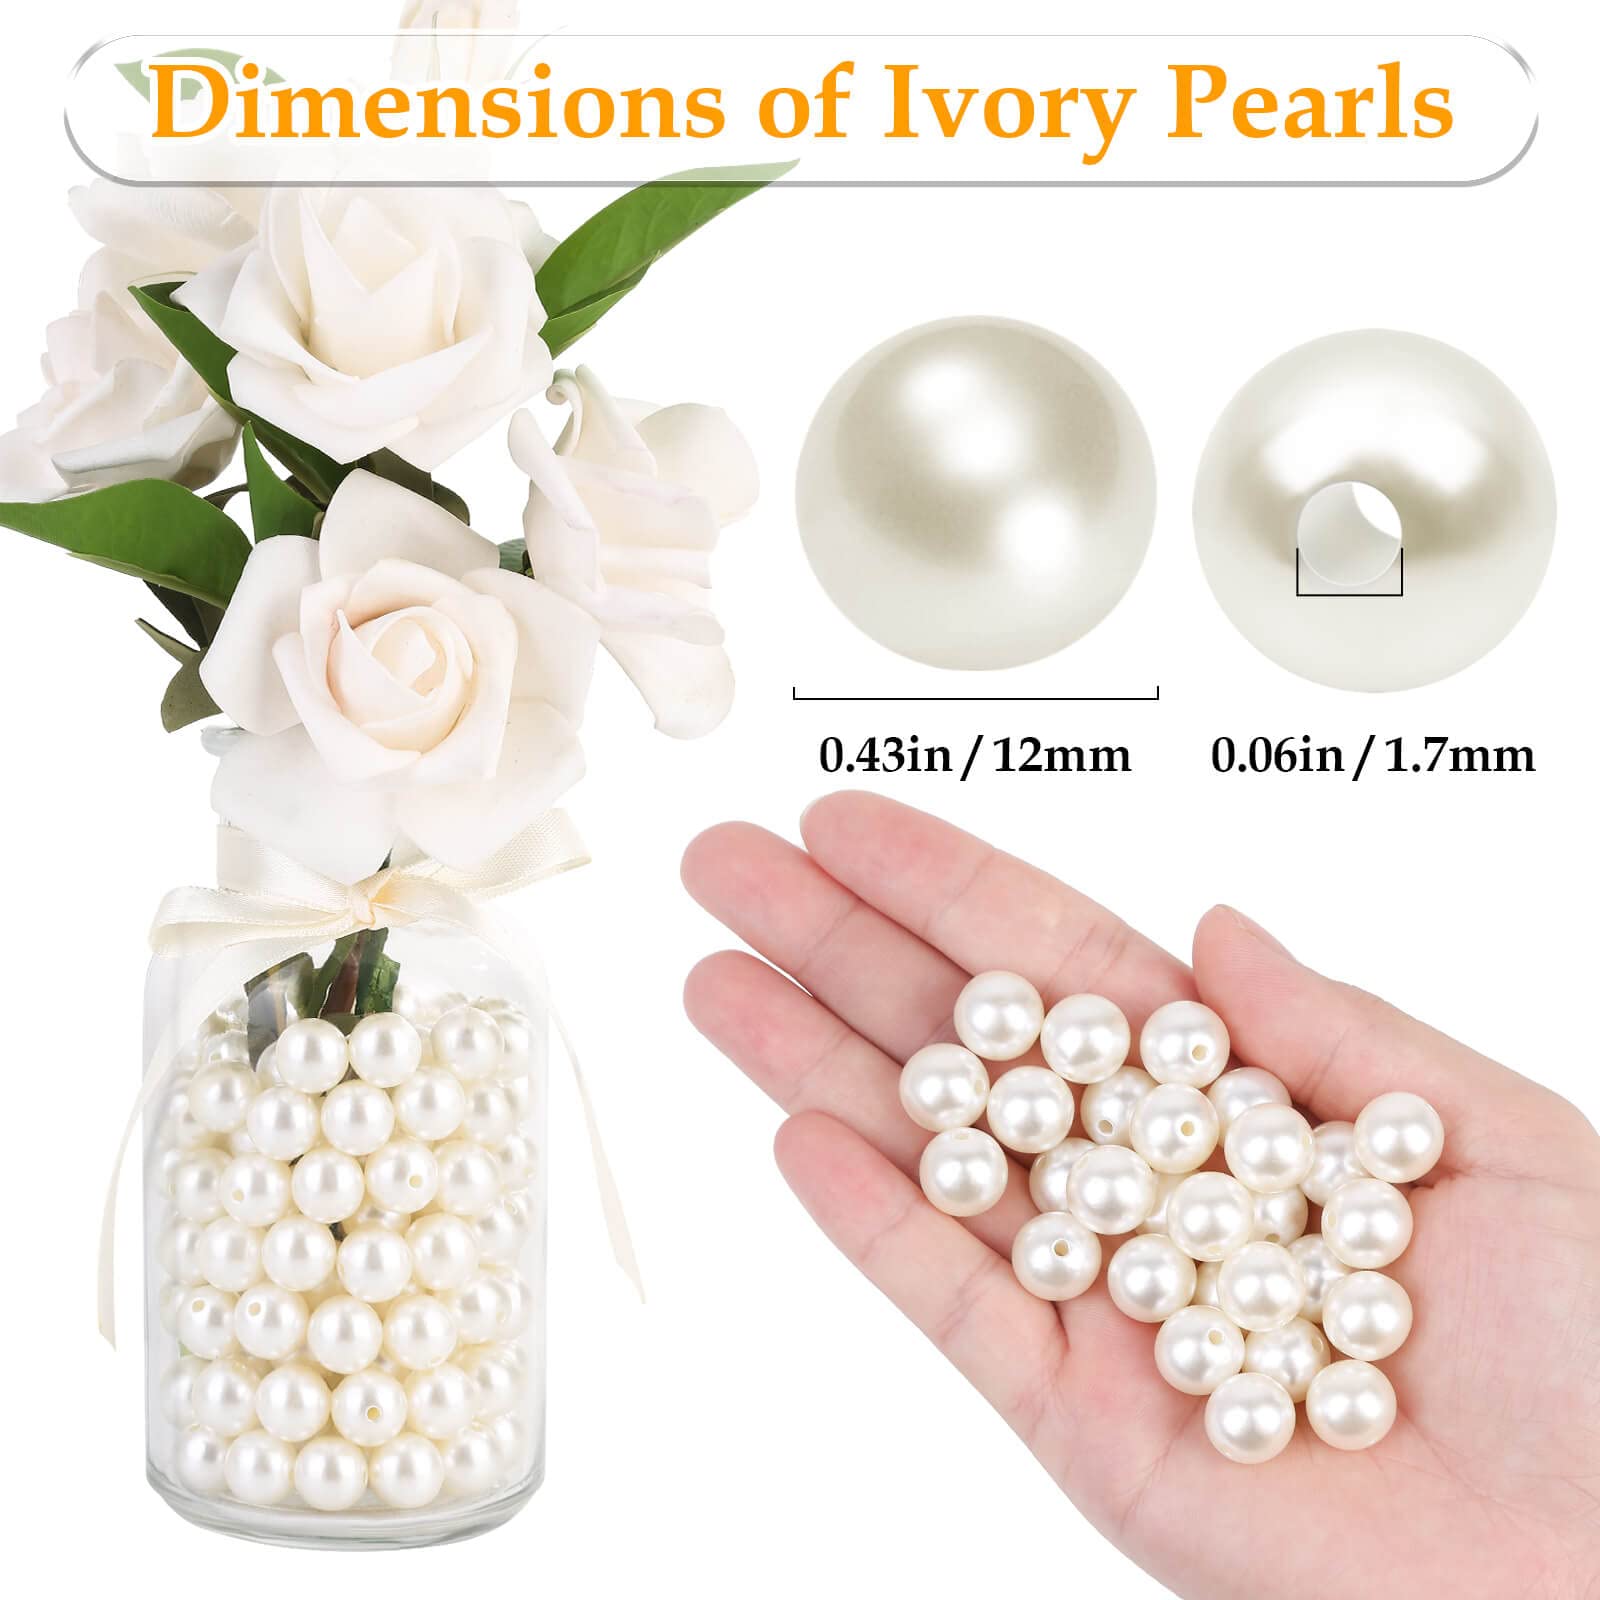 2 pcs Faux Pearl Flower Charms Jewelry Making Flower Charms DIY Crafts Flower  Charms 